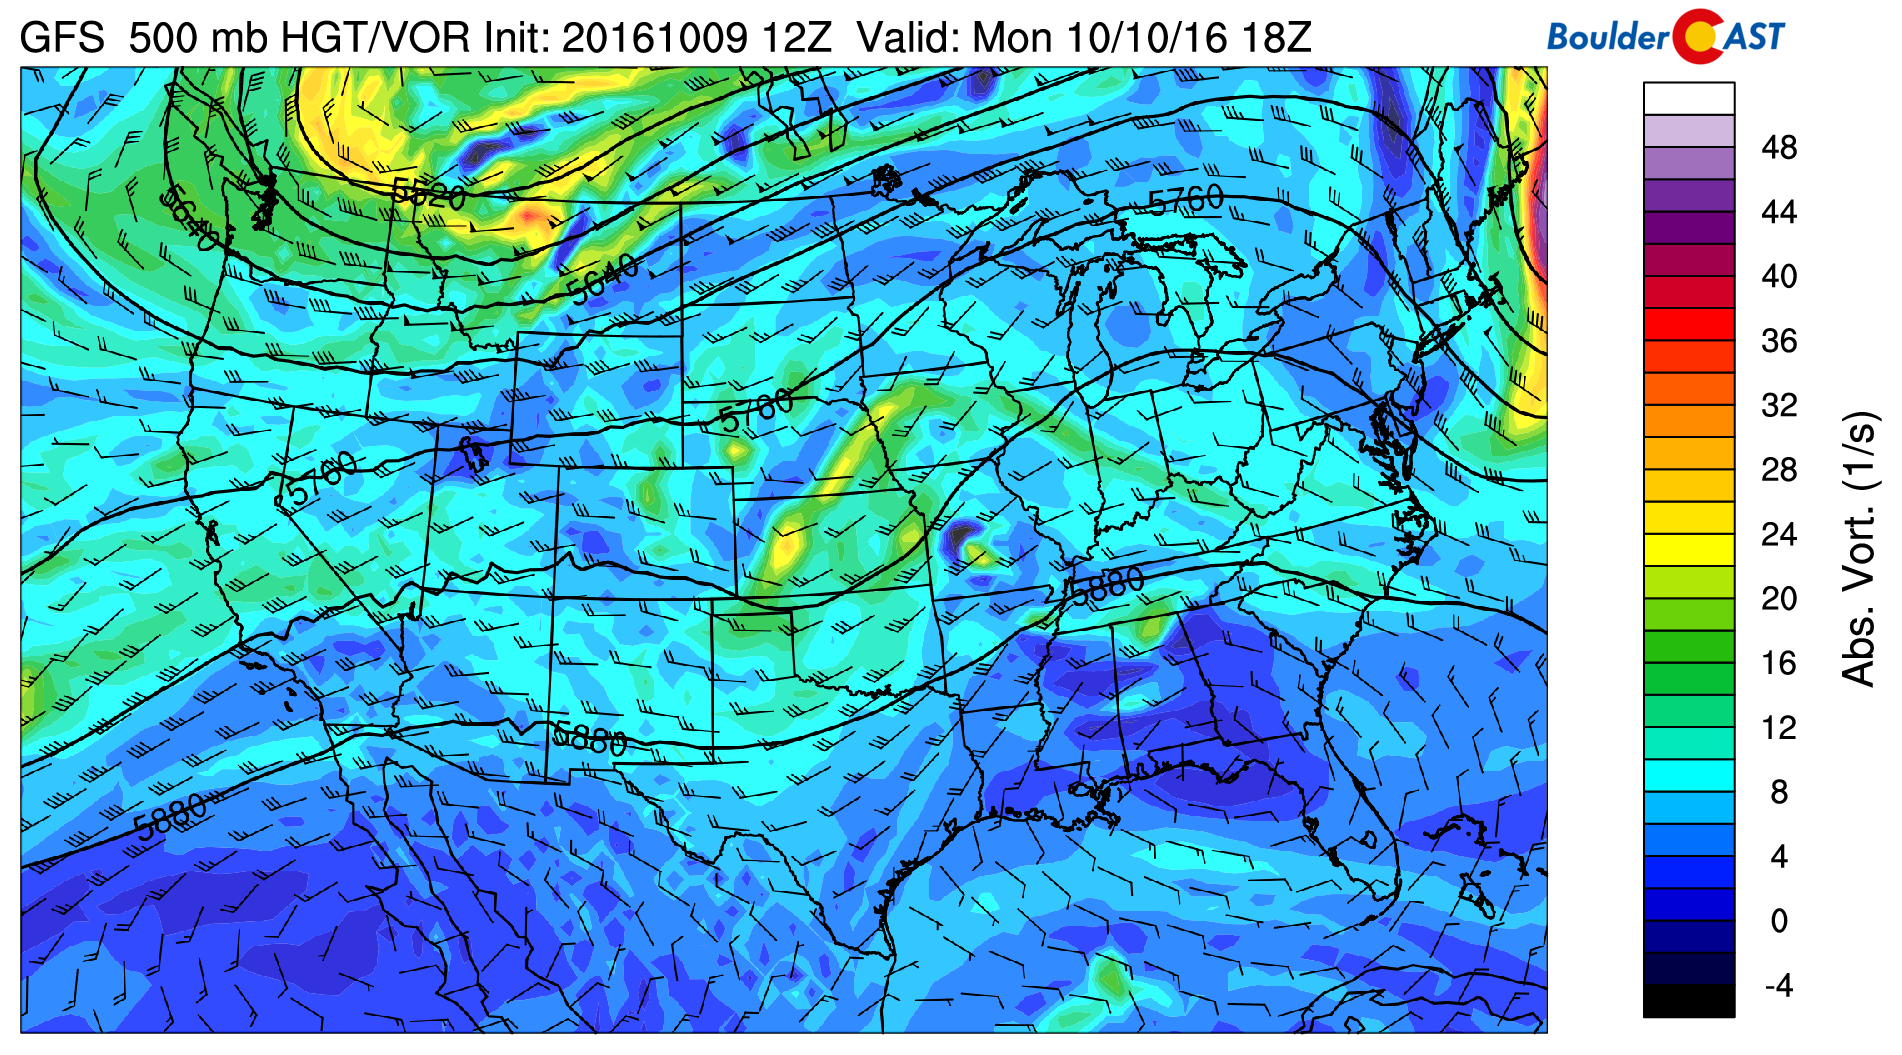 GFS 500 mb height and vorticity field for today